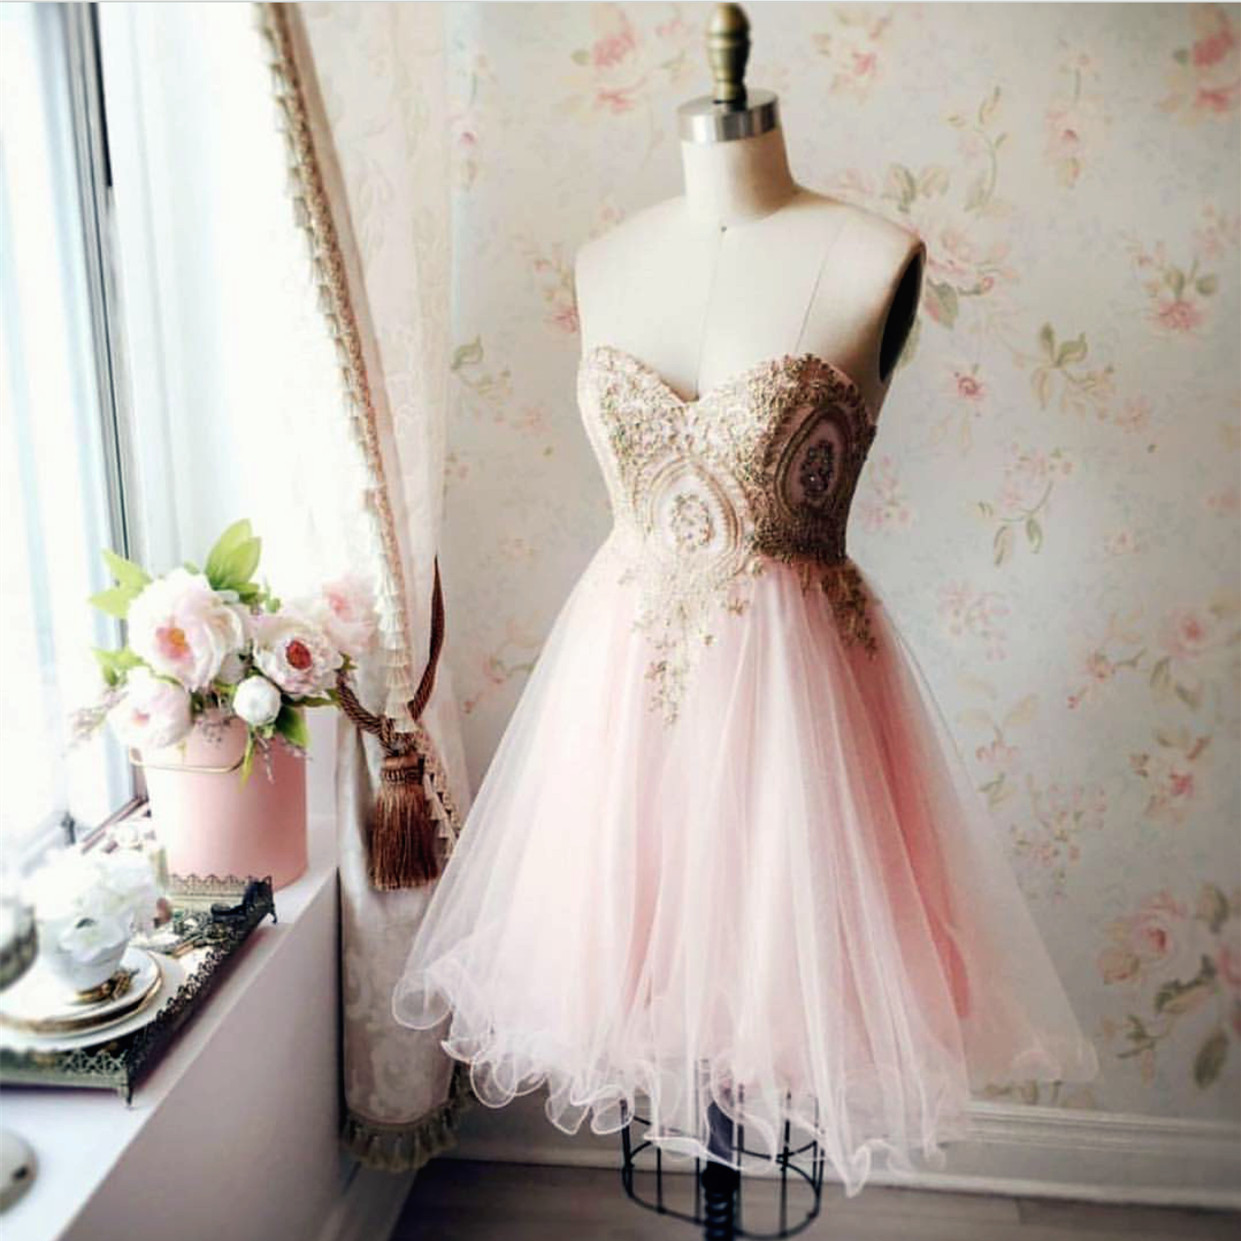 Pink Homecoming Dress,sweetheart Homecoming Dress,short Prom Dress,lace Applique Cocktail Dress, Mini Girls Dress, Short Cocktail Dress,wedding